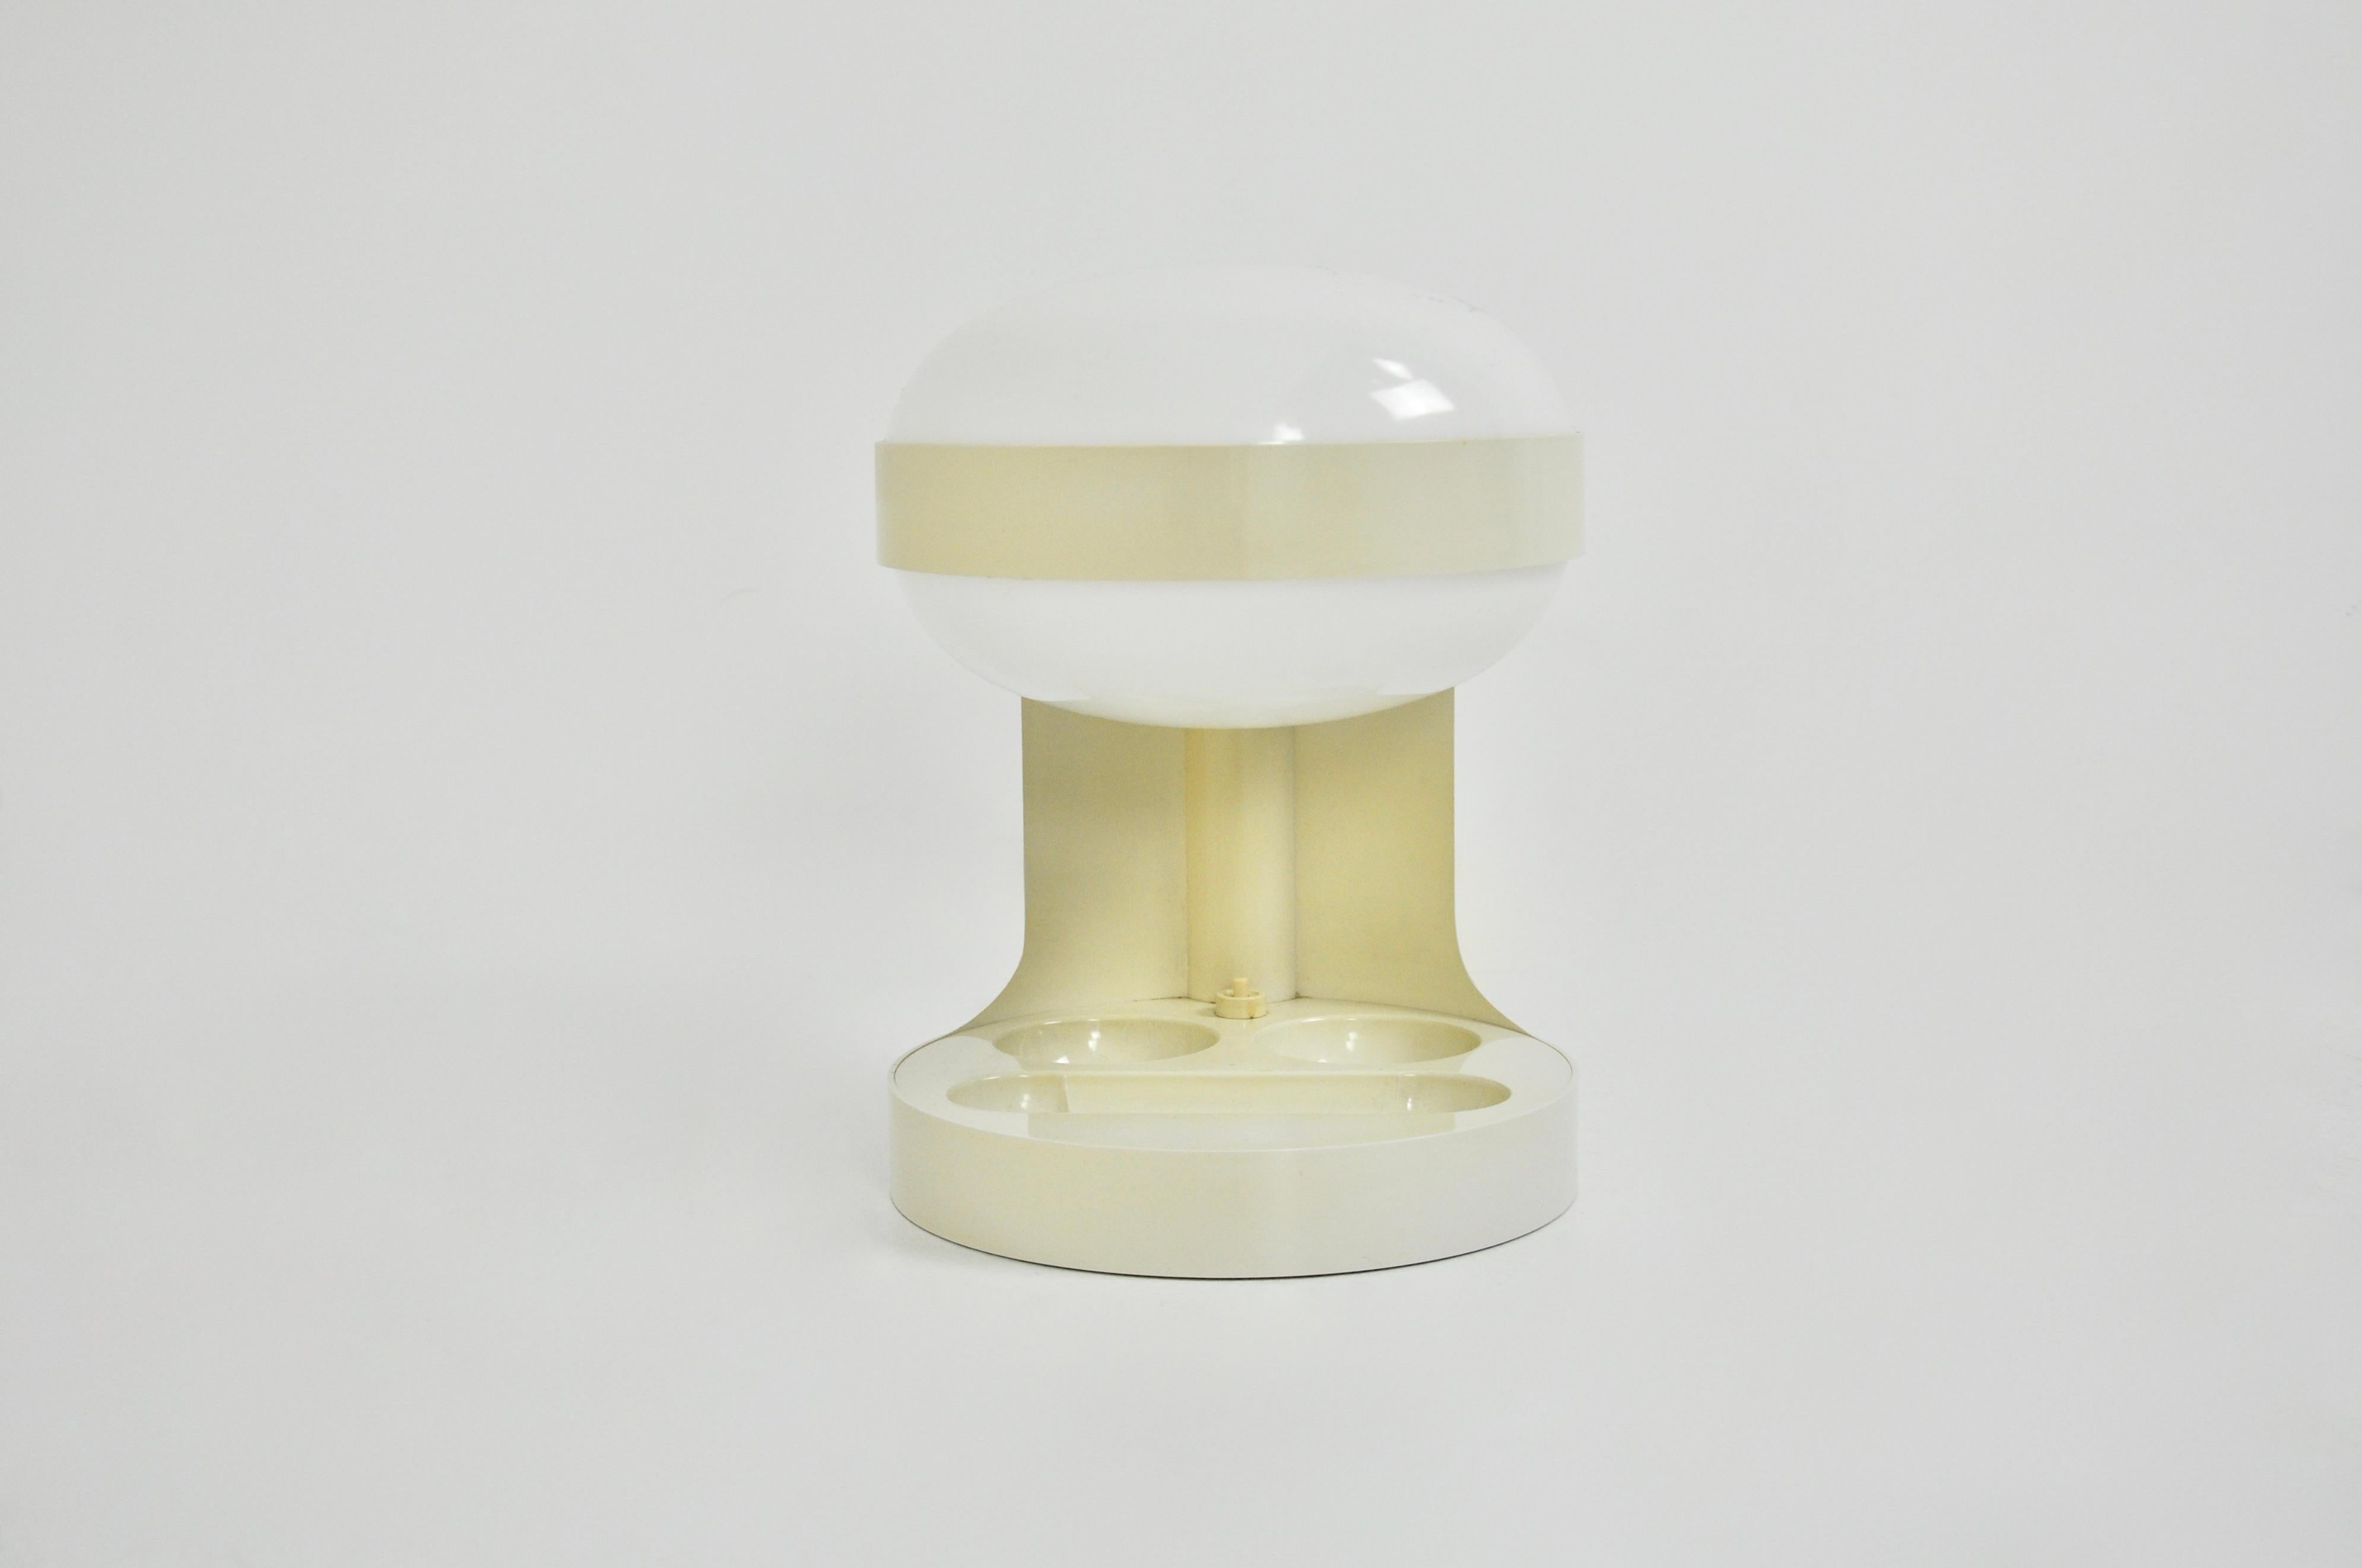 Plastic lamp of white color. Wear due to time and the age of the lamp.